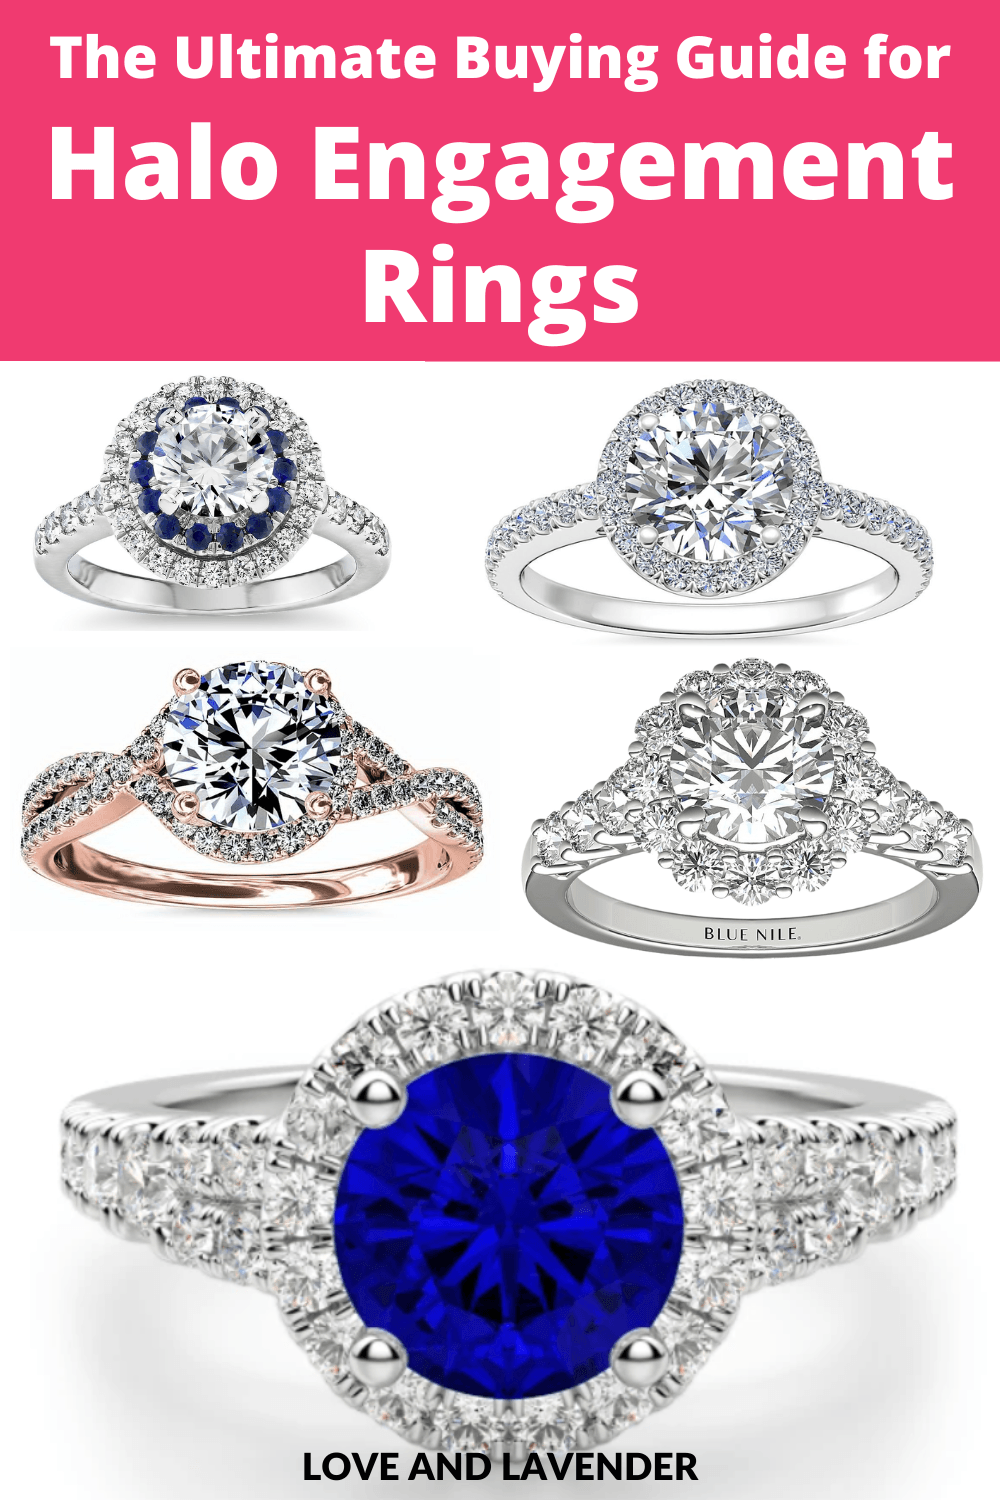 Have you found that perfect engagement ring? Try a little out of the fad with Halo rings! Halo engagement rings are beautiful, elegant and timeless. They're also more than just an elaborate way to make your center stone appear larger and they've been around for centuries!